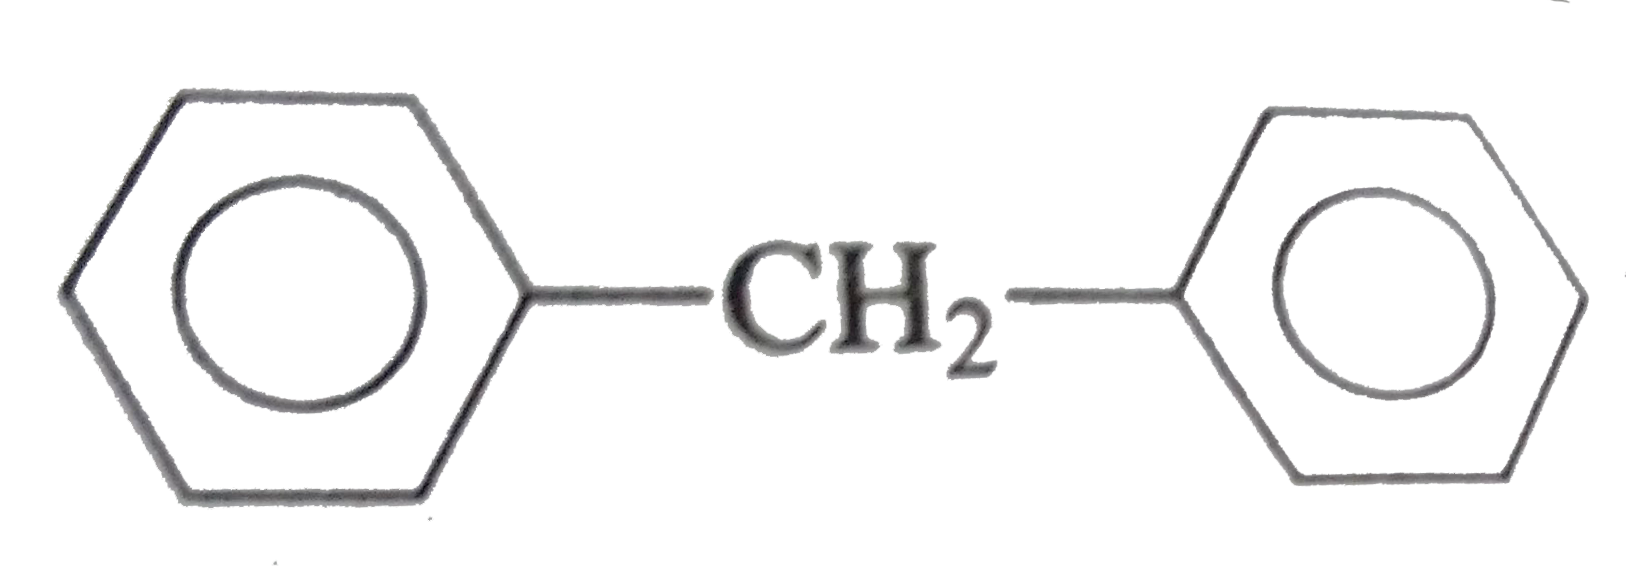 The formula of disheylnethane       How many structural are possible when one of the hydrogen is replaced by a chlorine atom ?